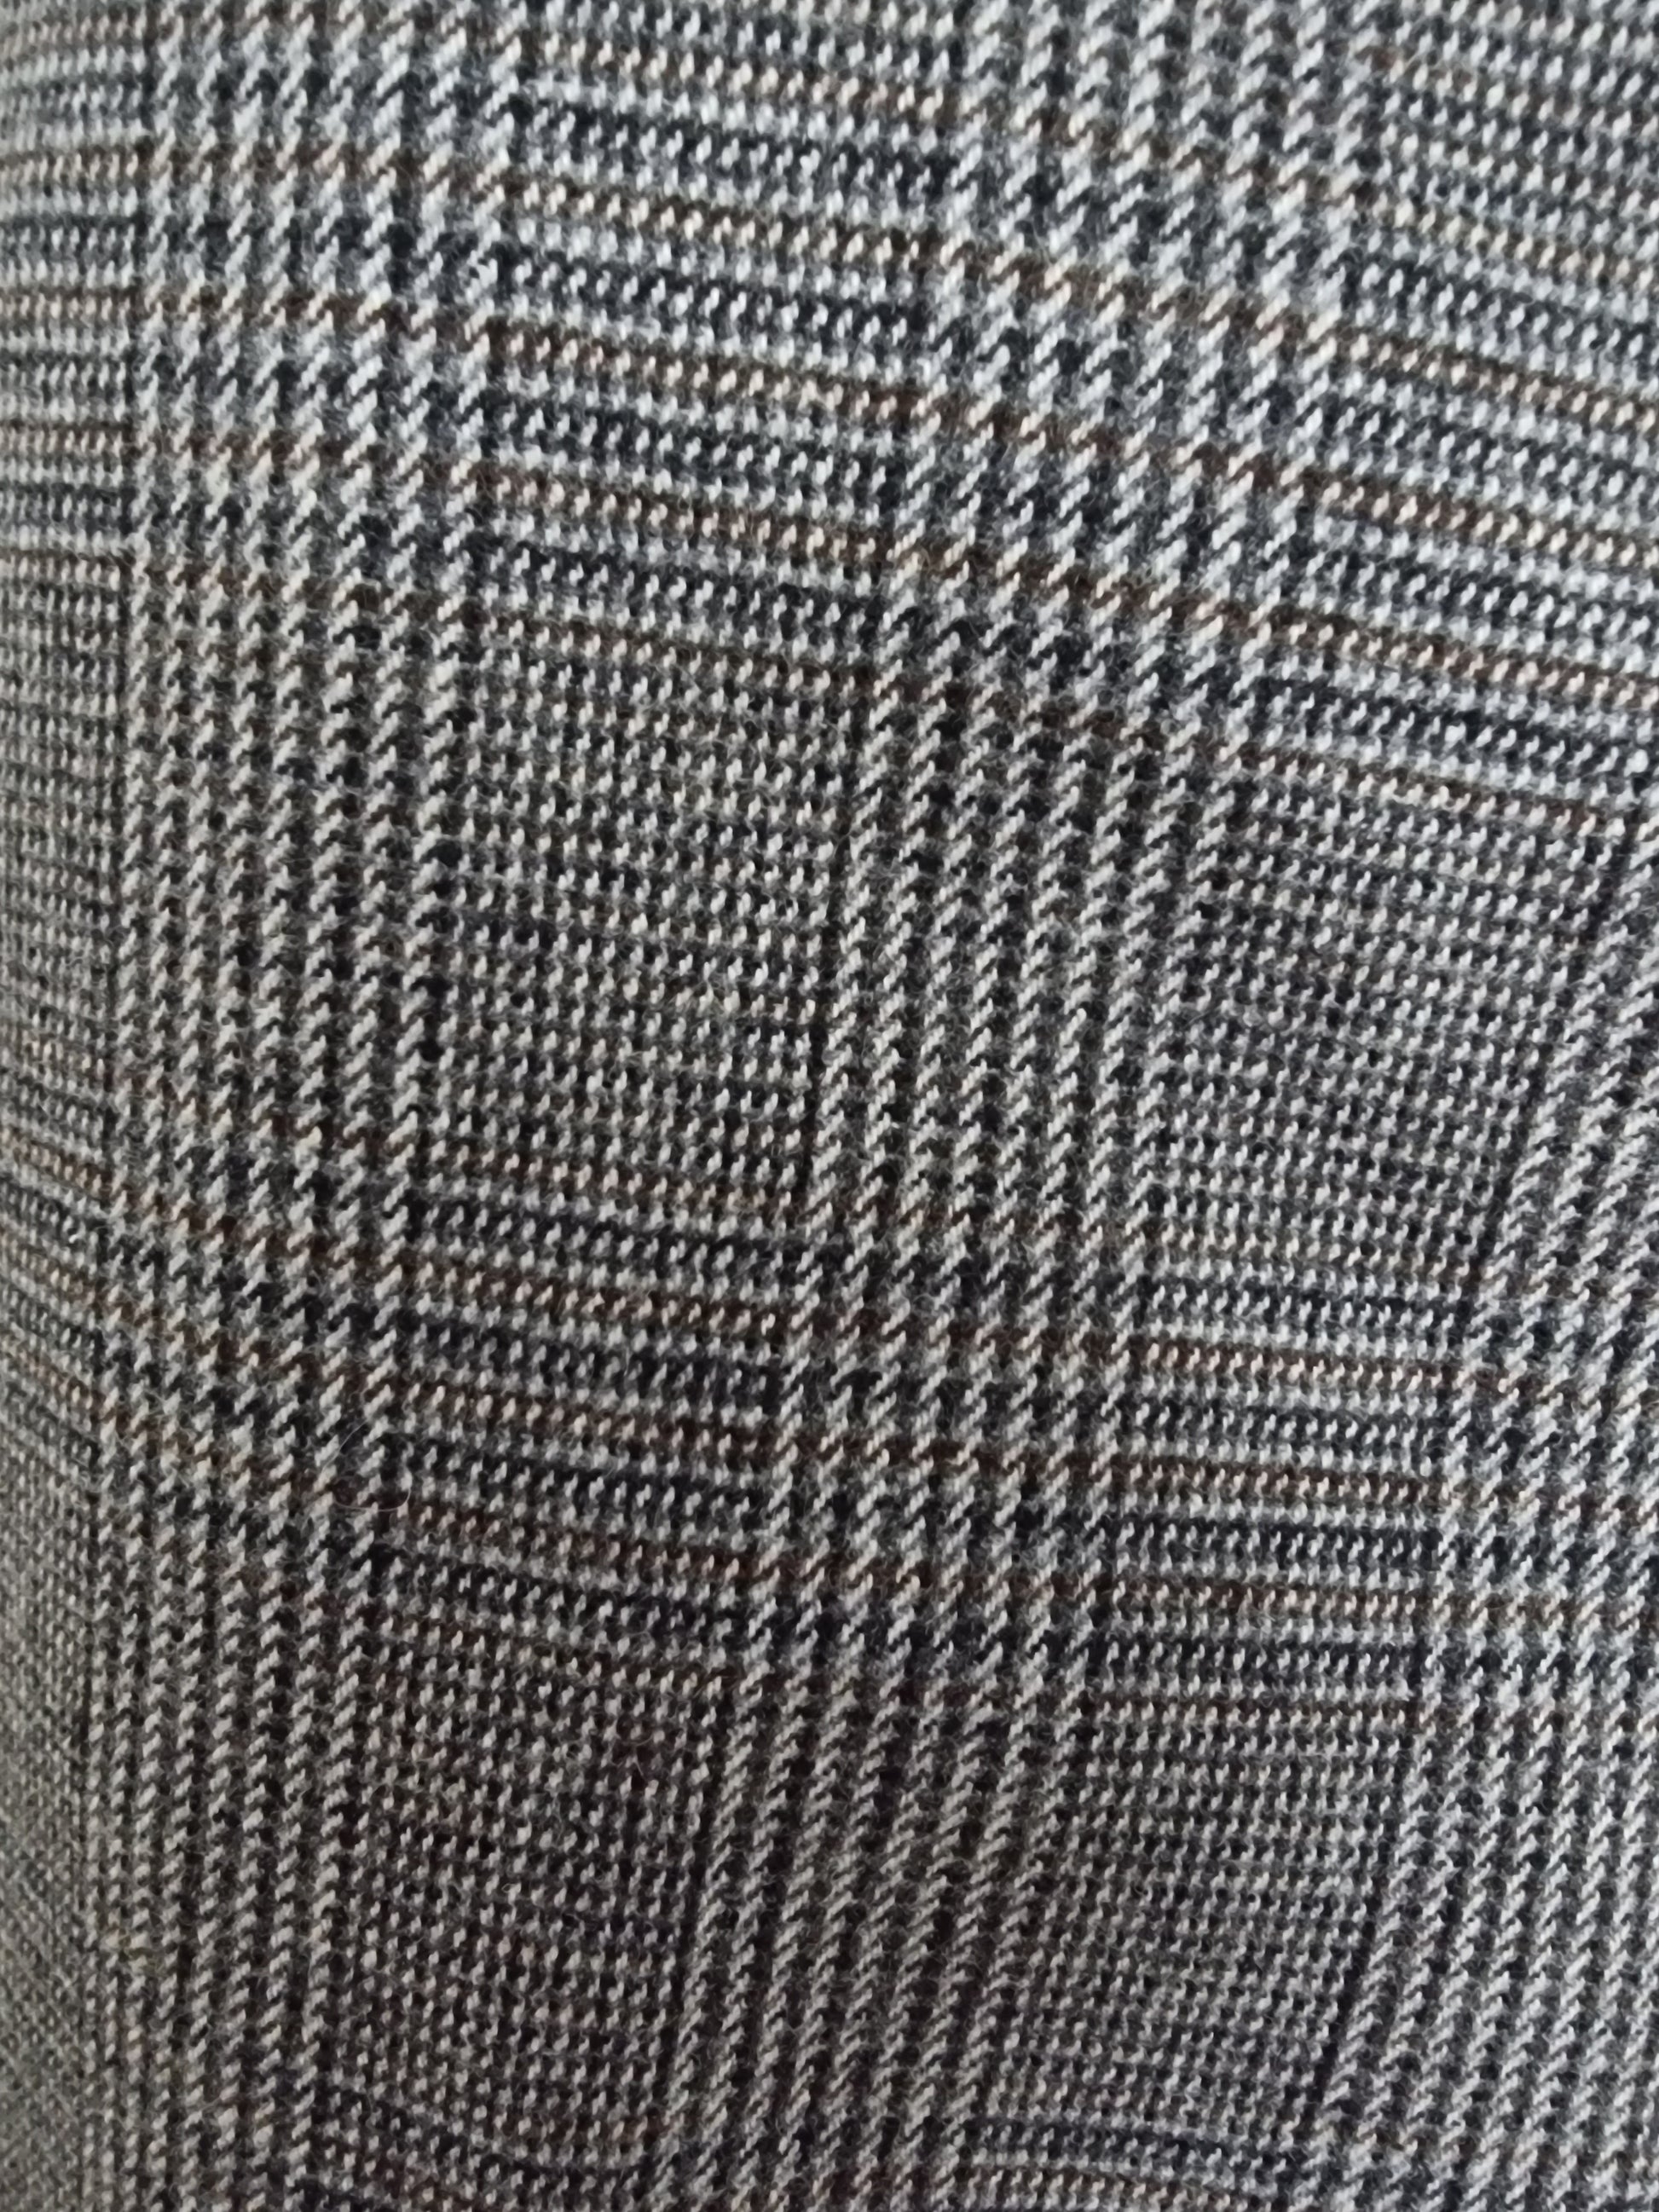 Bespoke Italian Tailored GreyTwo Piece Suit In Prince of Wales Check. Timeless Fashions